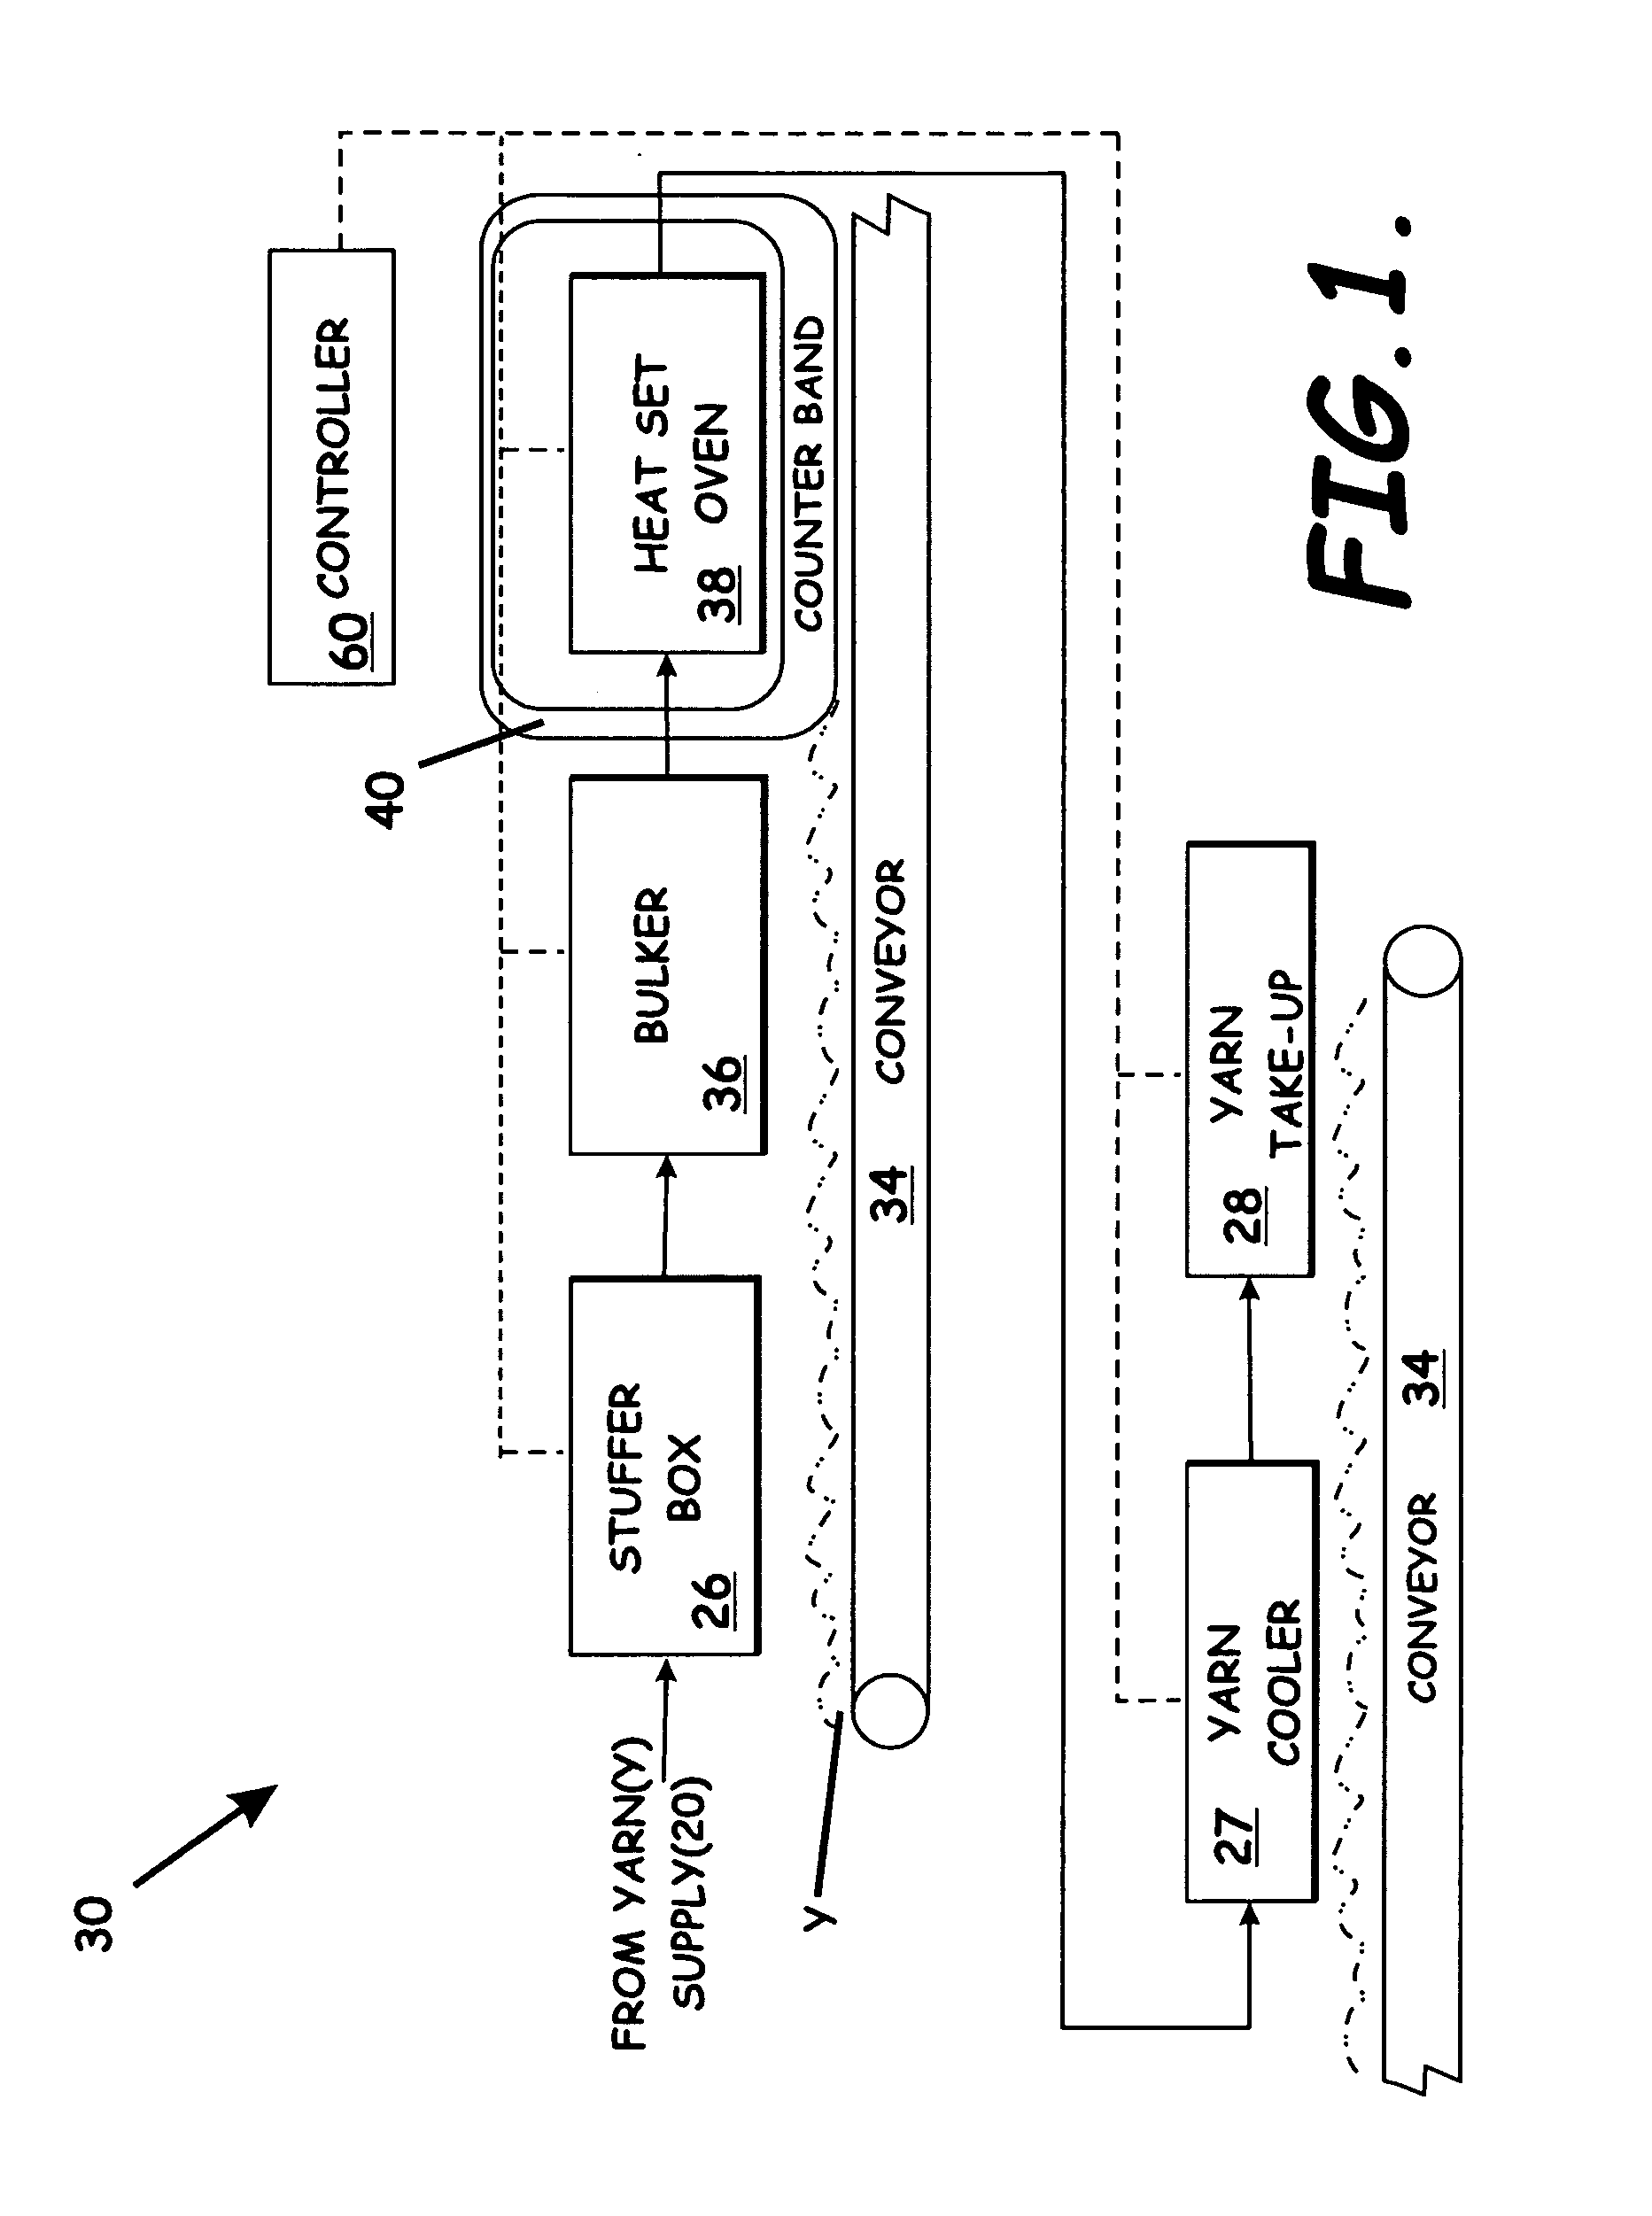 System, apparatus, and method of reducing production loss having a counterband